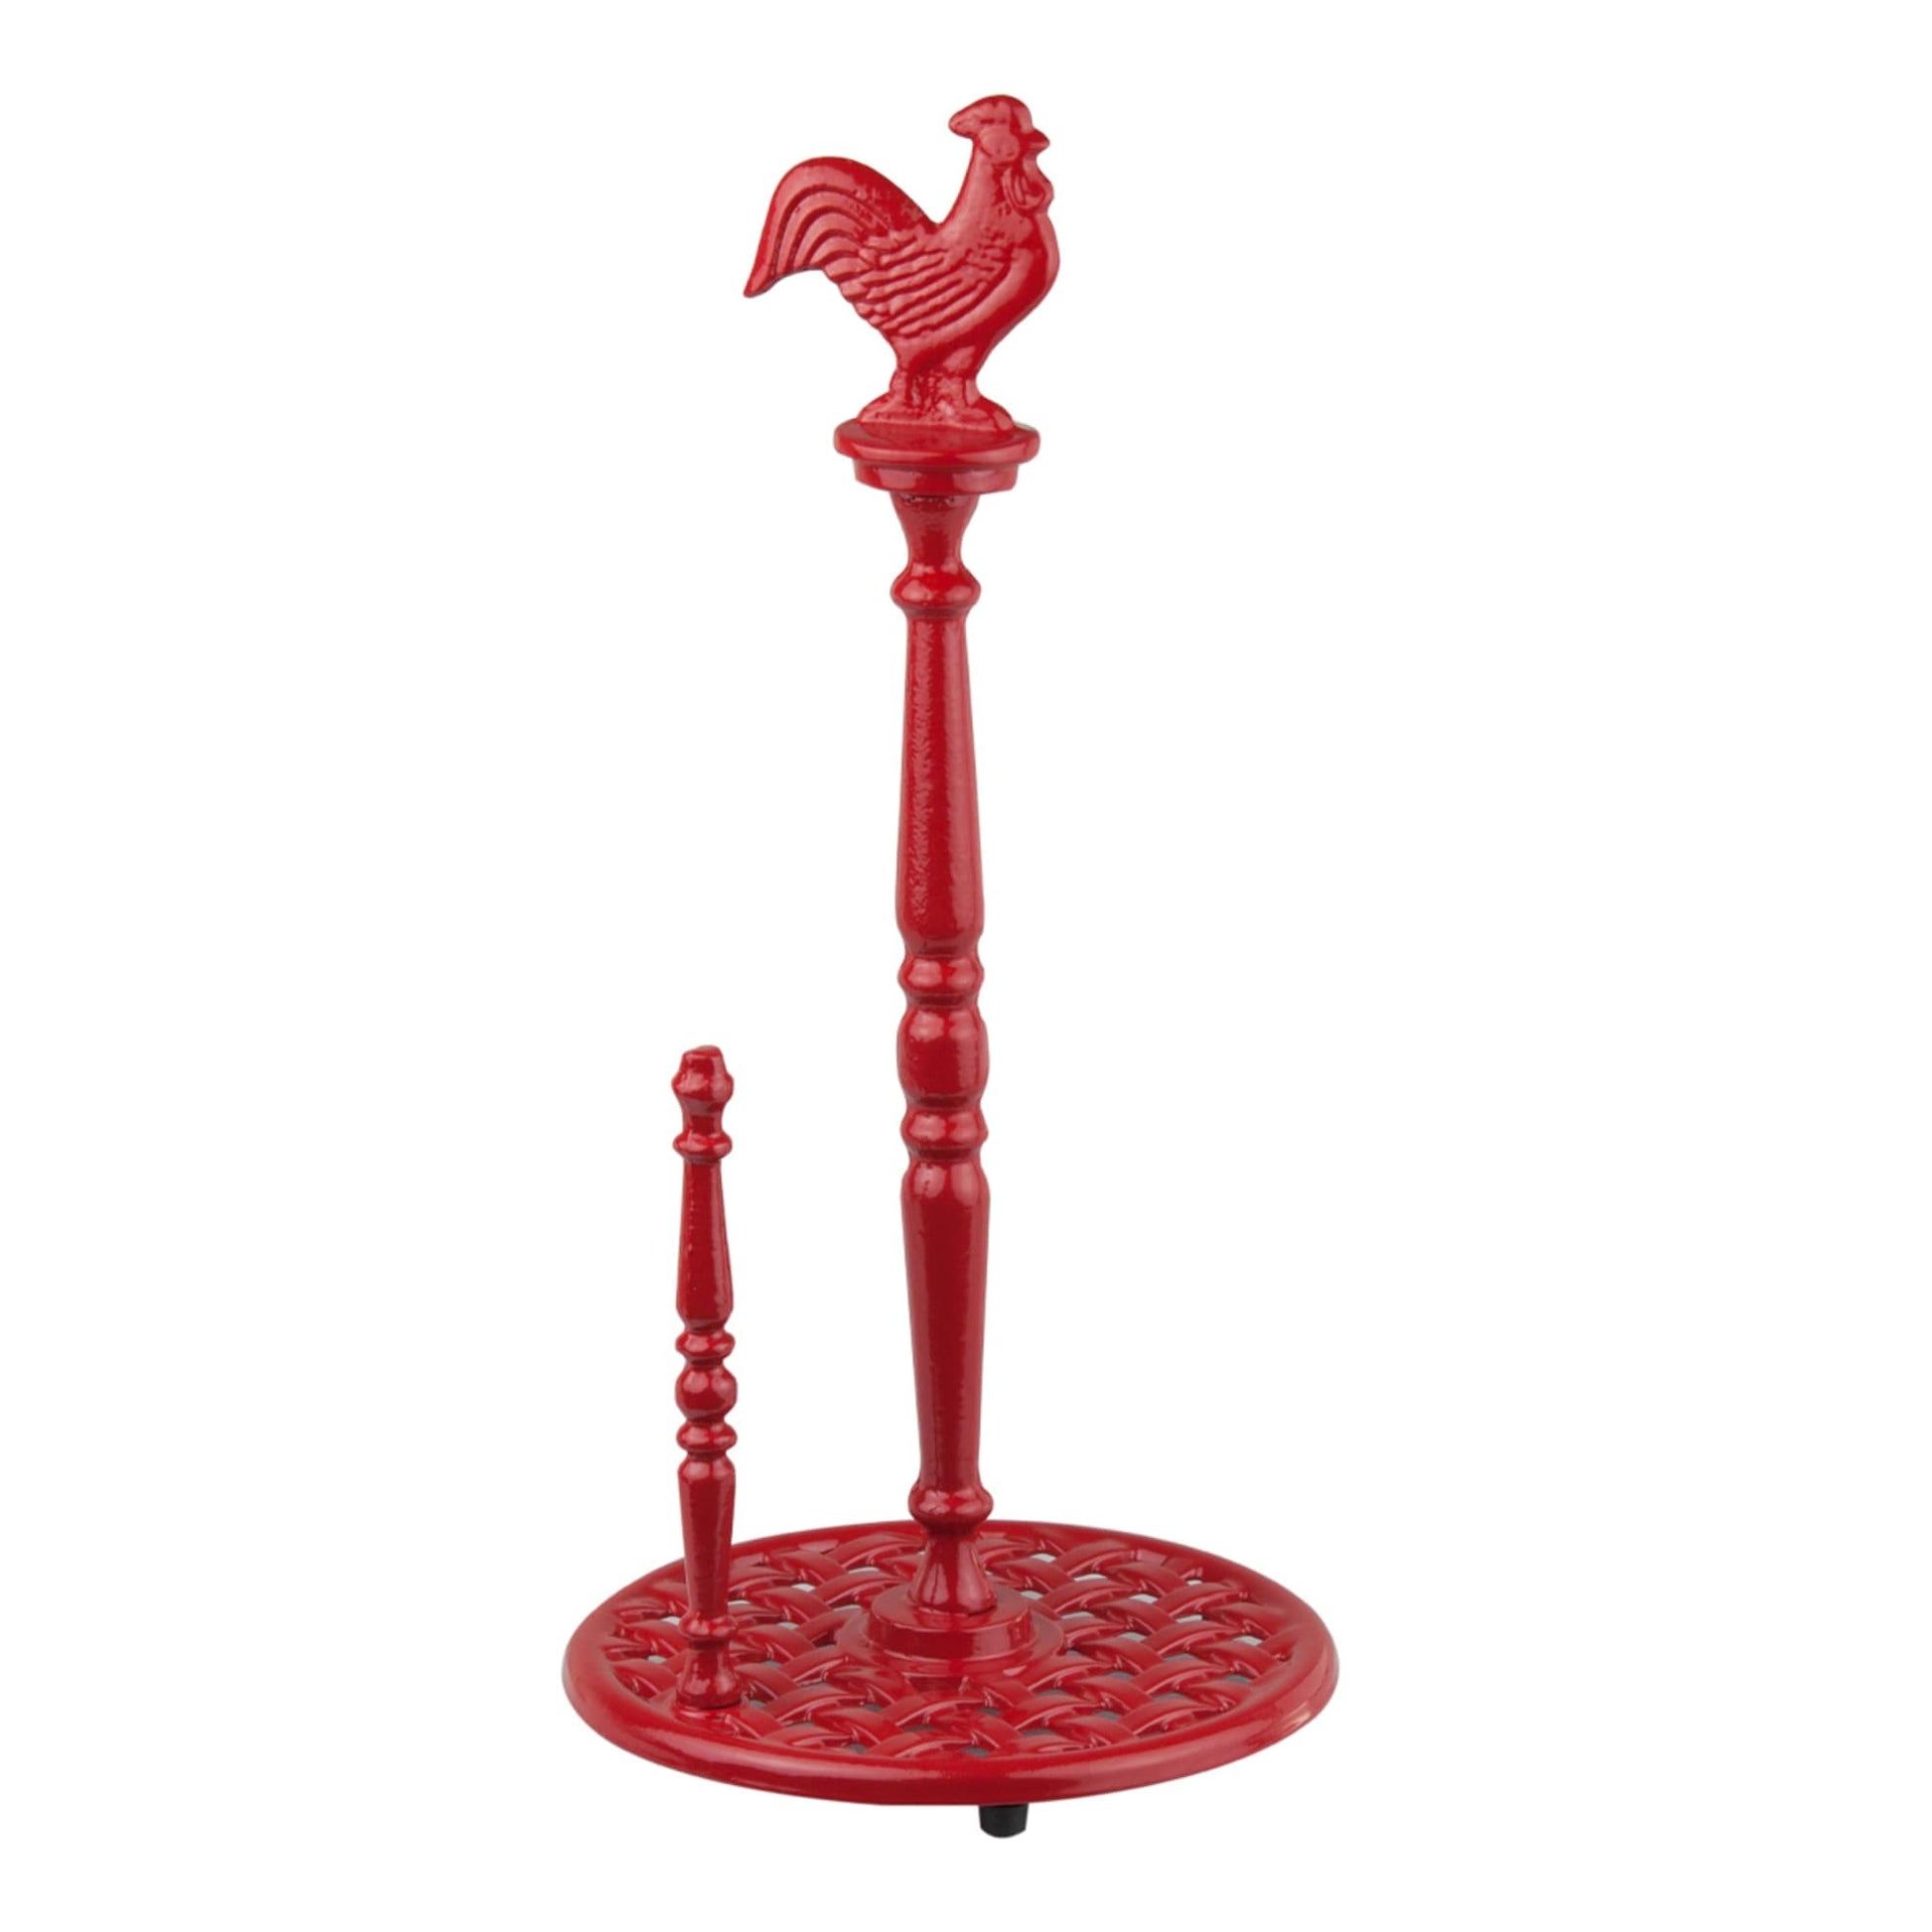 MINLUFUL Red Paper Towel Holder Stand - Vintage Cast Iron Weighted Base Roll Paper Towel Dispenser Holder for Kitchen Countertop, Easy